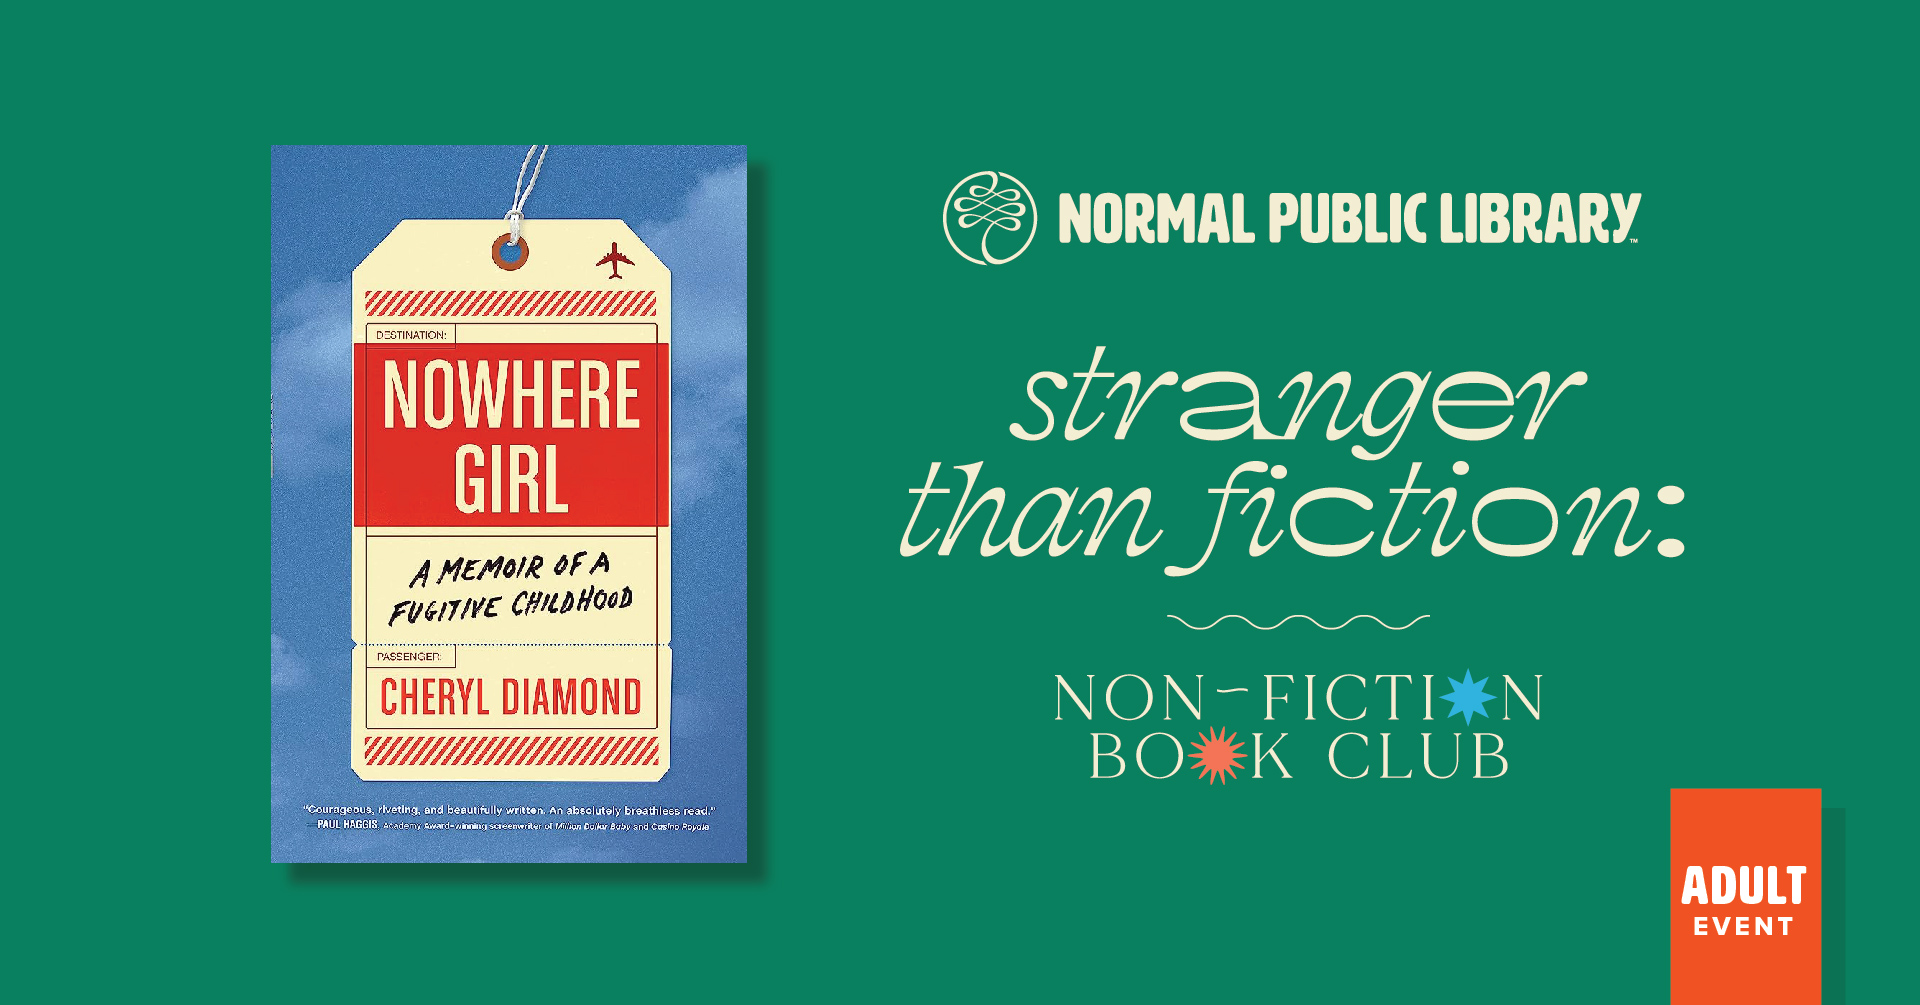 Image for Stranger Than Fiction:  A Nonfiction Book Club.